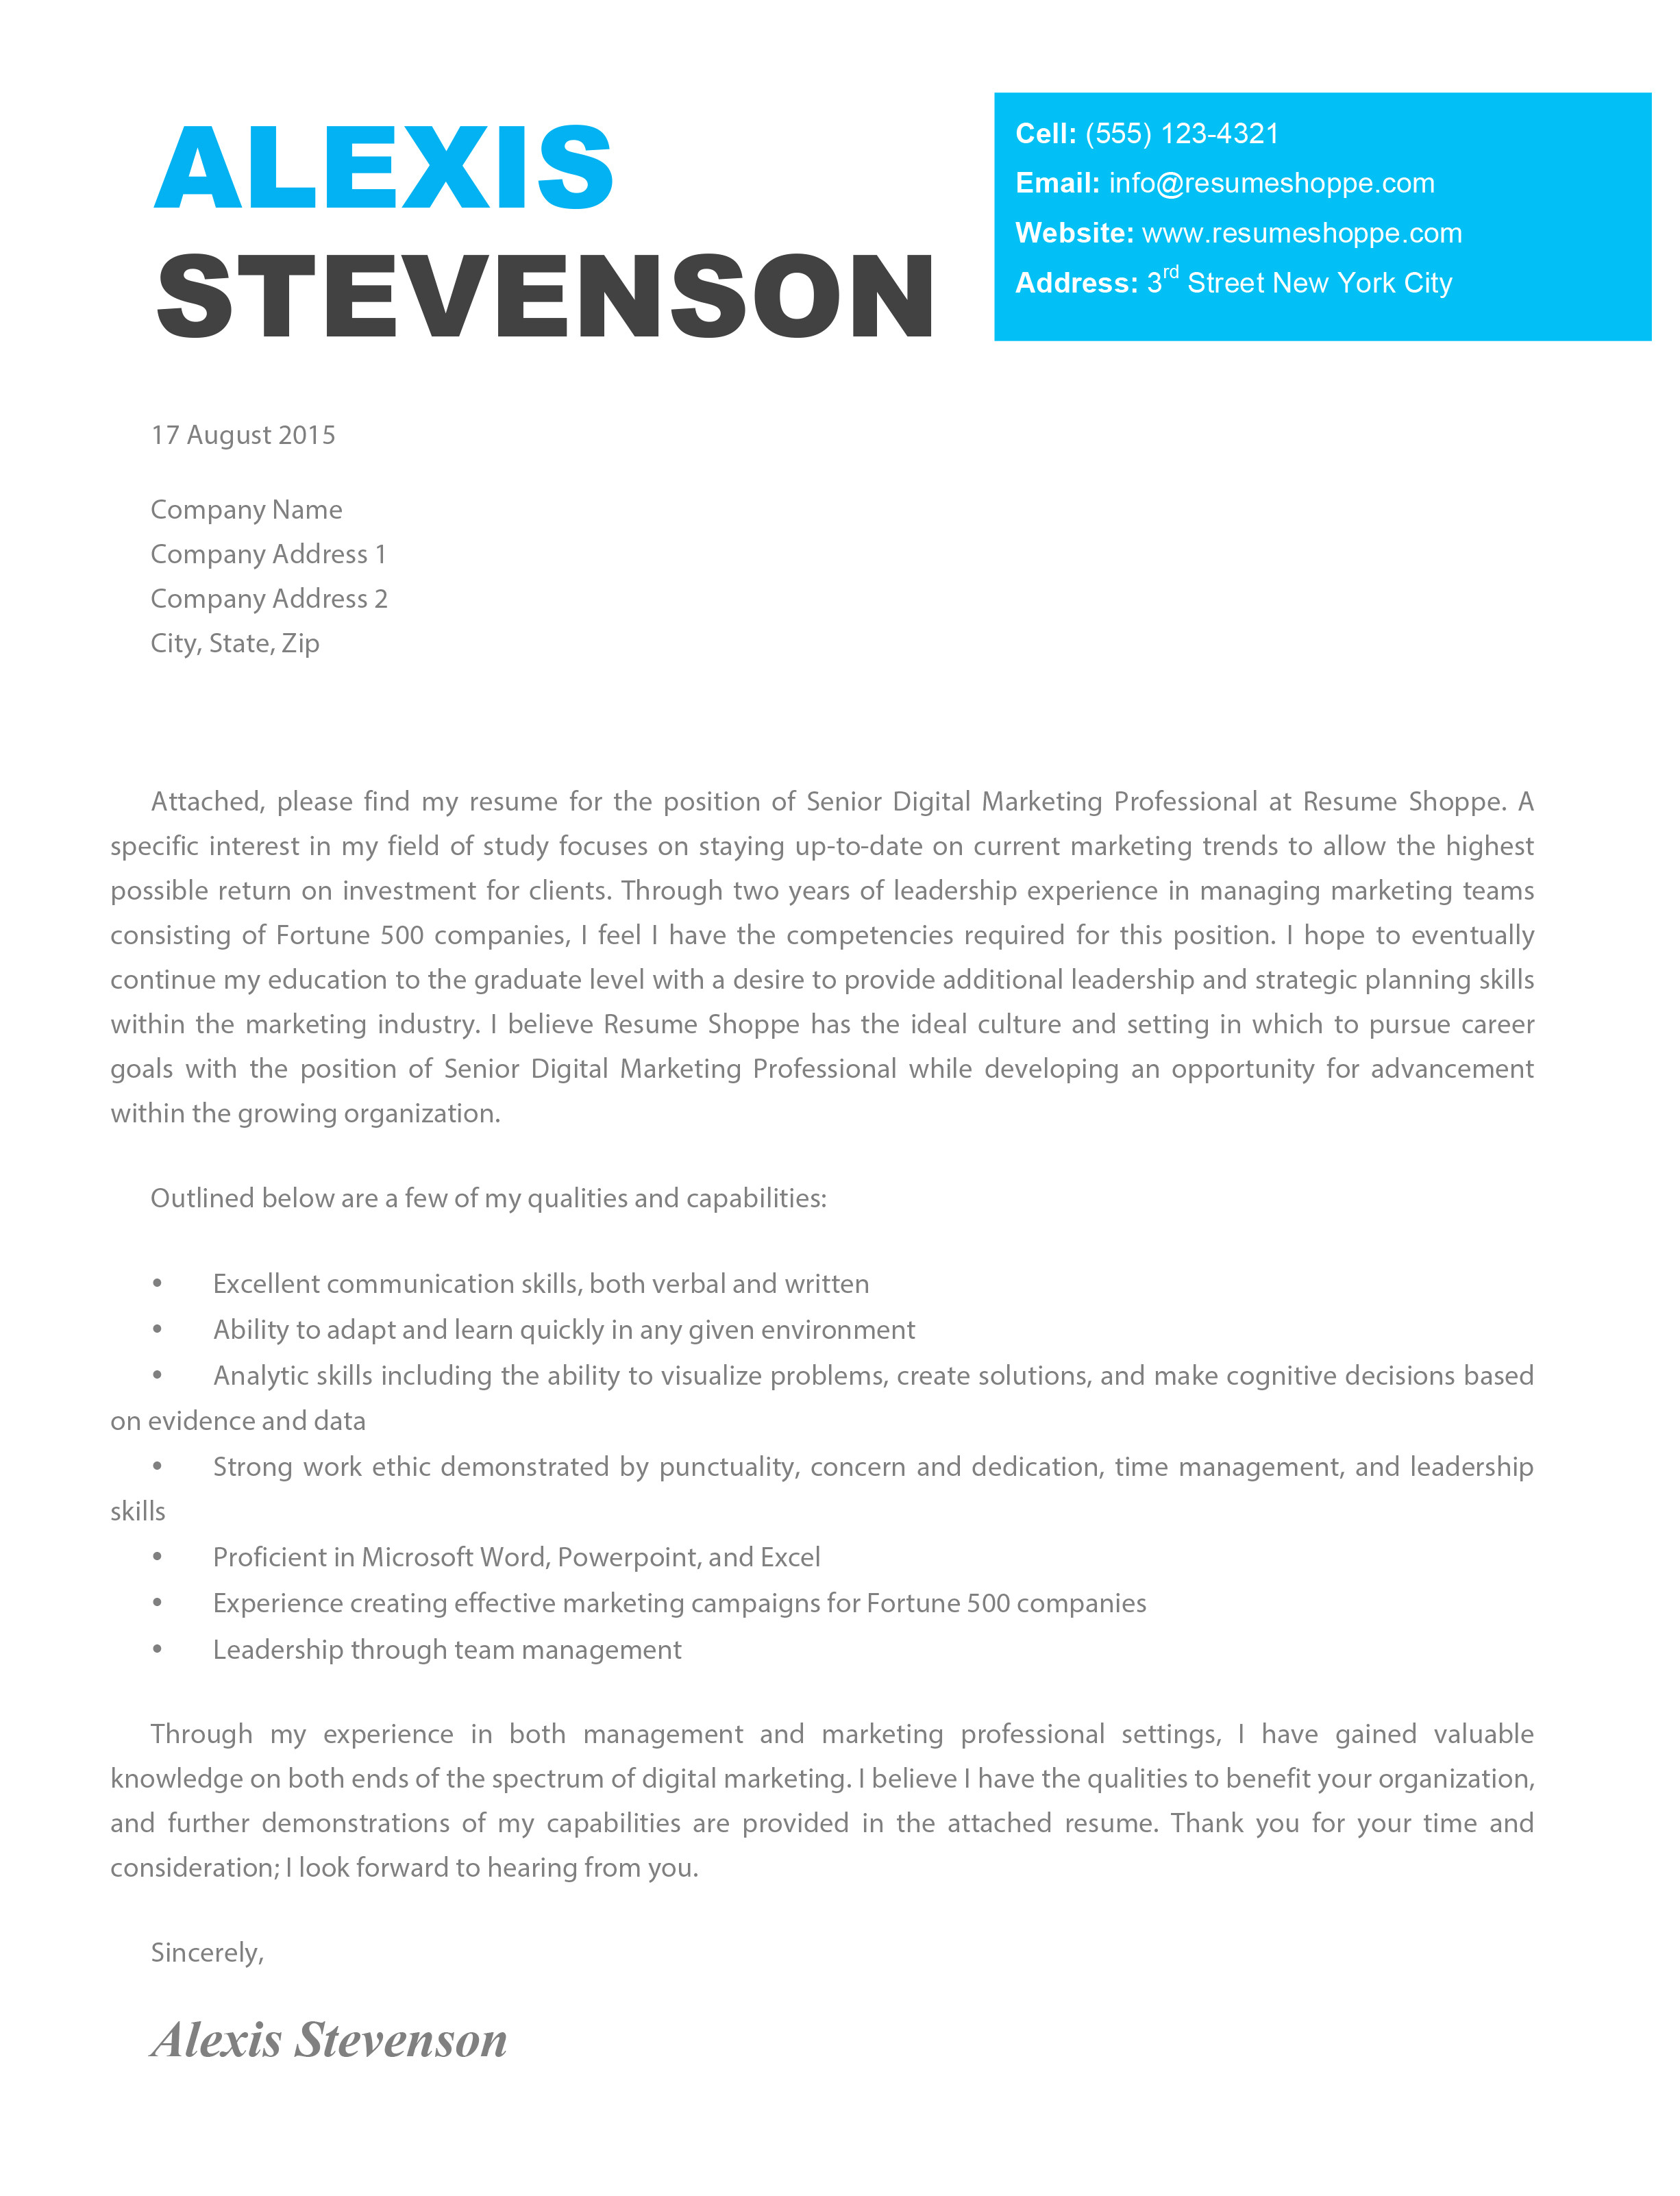 Creative Cover Letters for Marketing the Alexis Cover Letter Creative Cover Letter